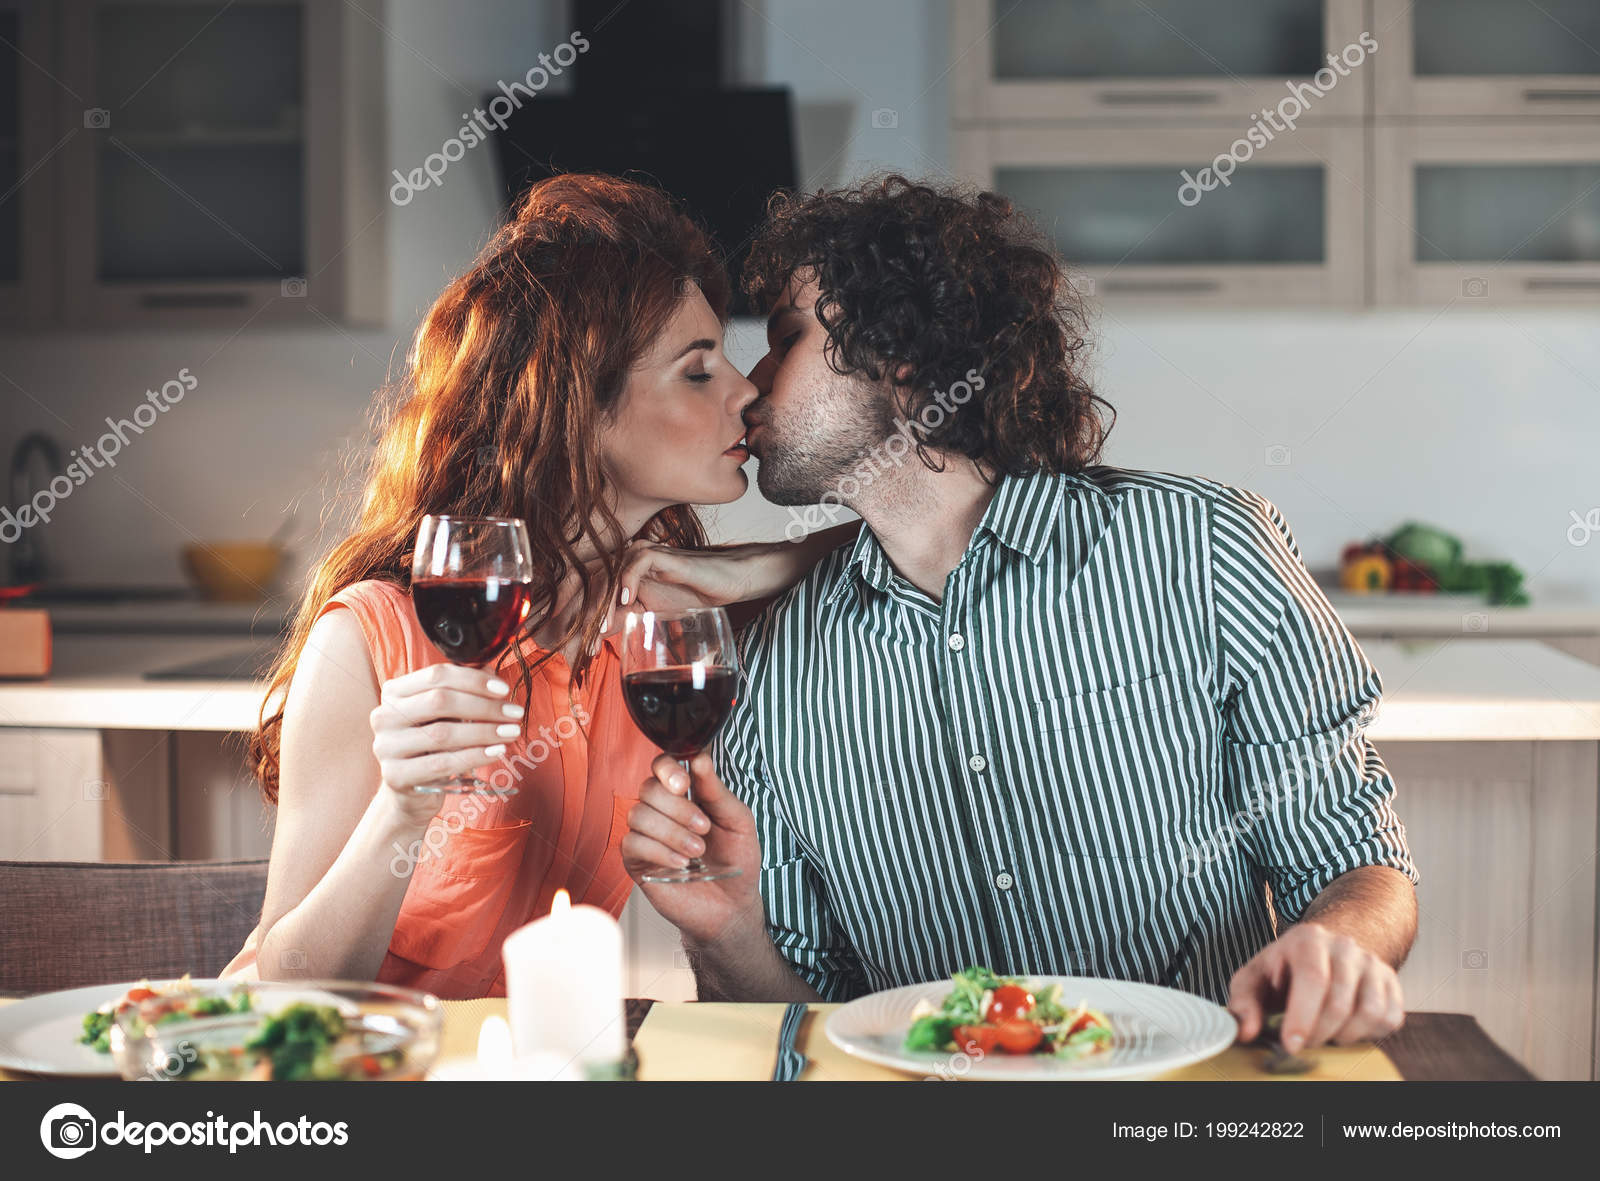 Passionate love making between husband and wife